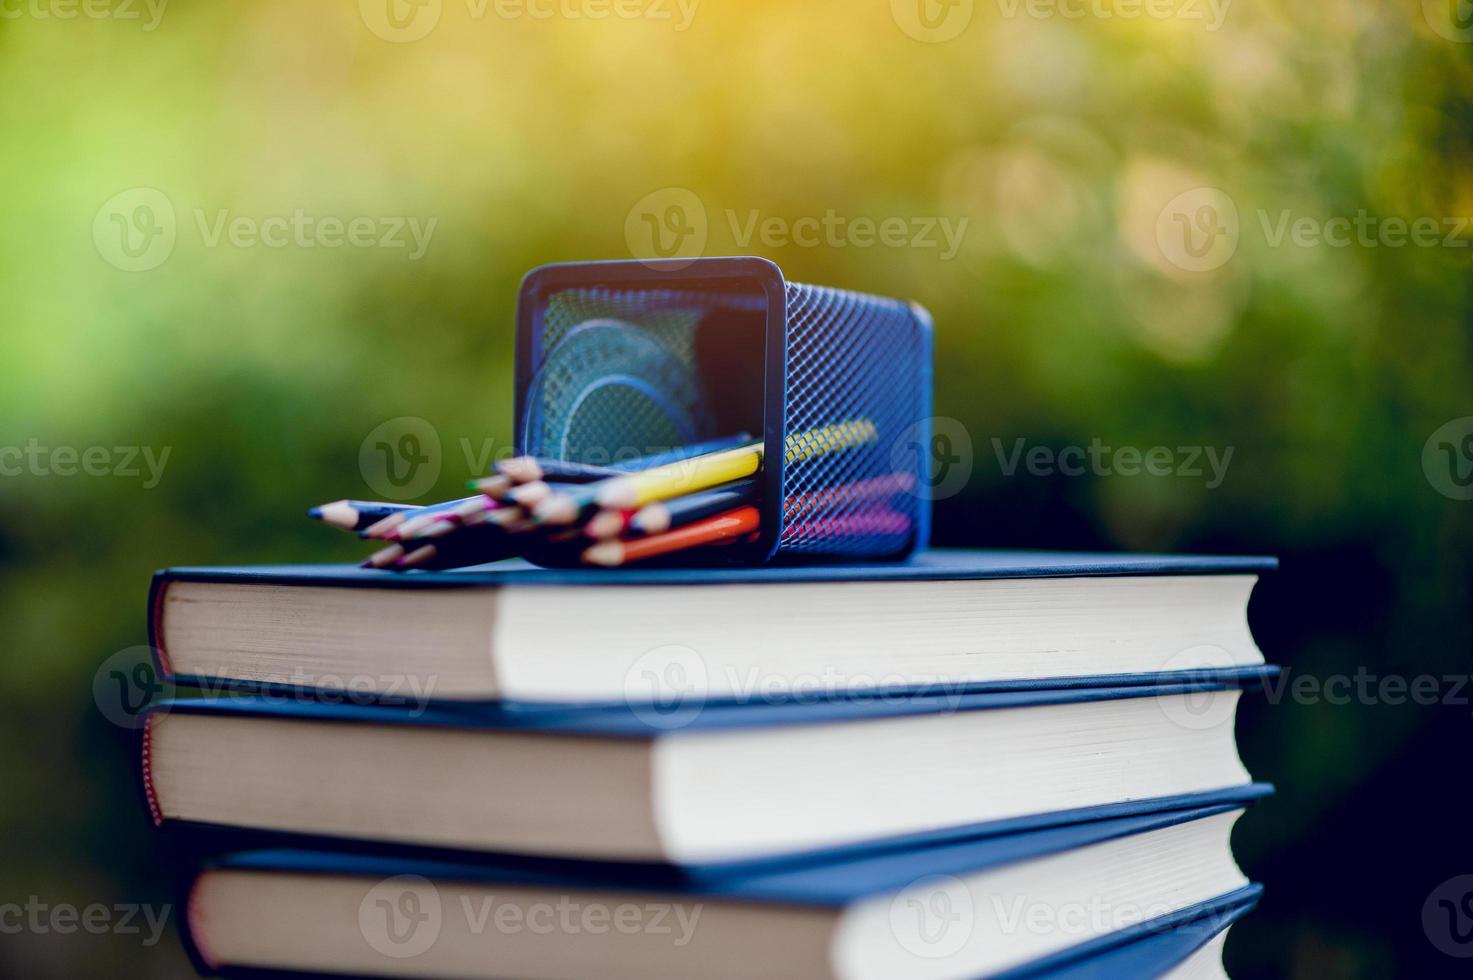 Many books are placed on the table, school supplies. Education concept photo